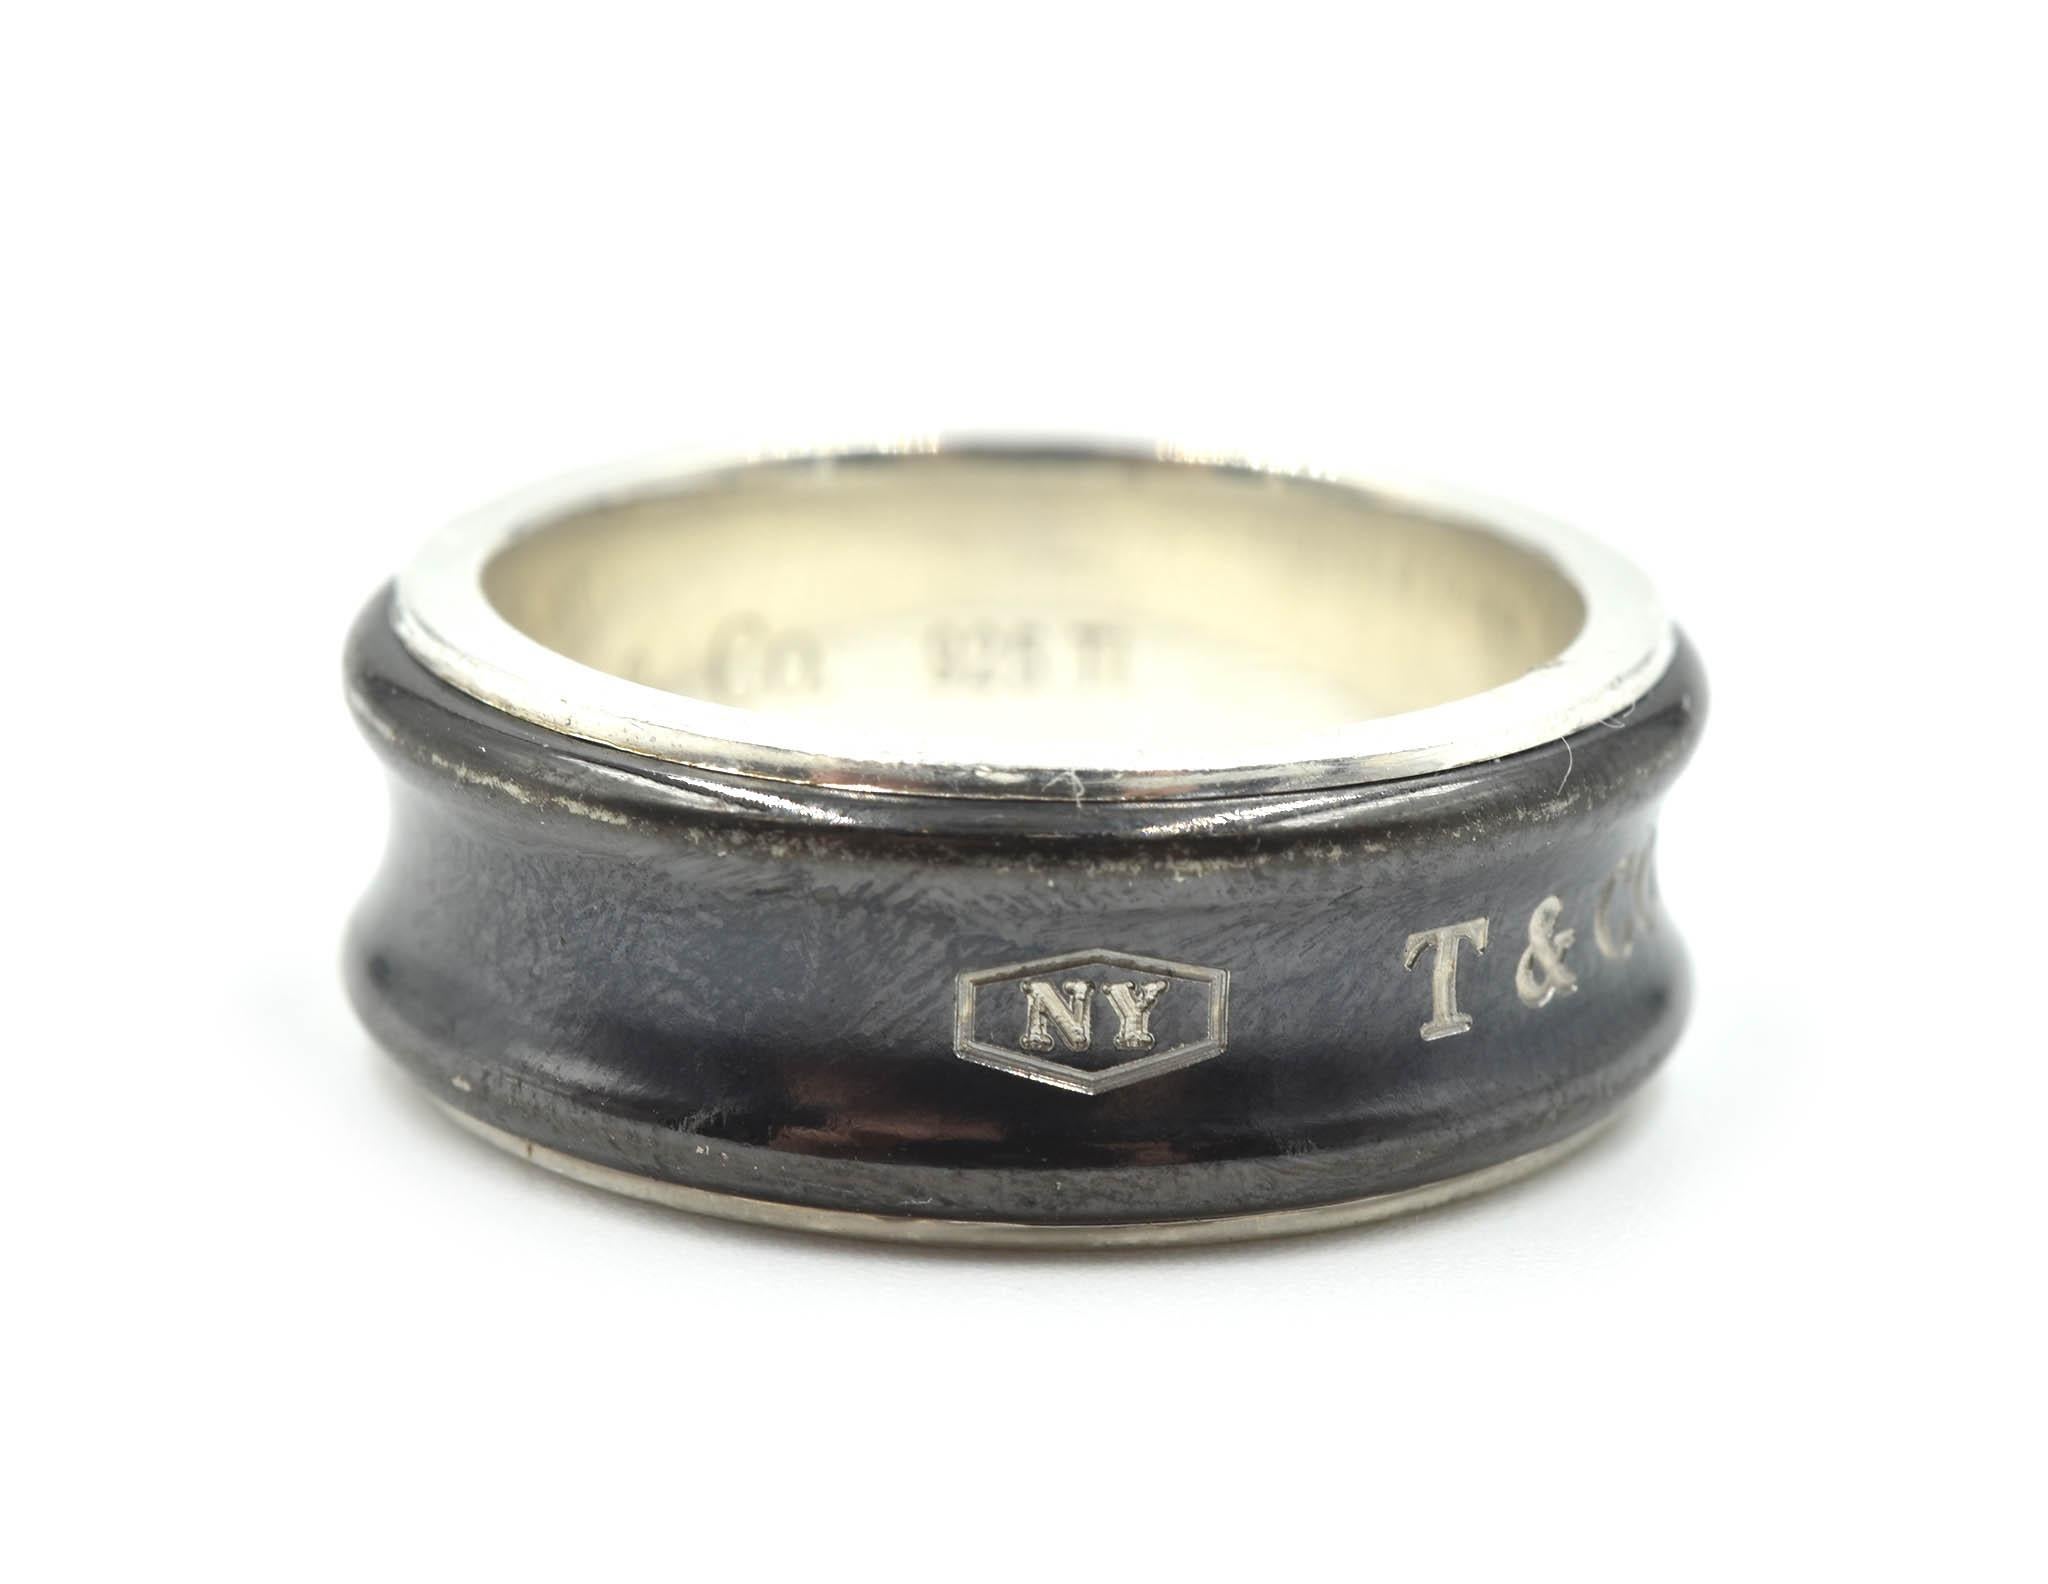 This is a timeless design by a classic designer! Tiffany & Co made this gents wedding band in titanium with sterling silver! The band is size 8; and measures 8.48mm in length and 2.32mm in width. The wedding band weighs 8.00 grams. Hallmarked on the